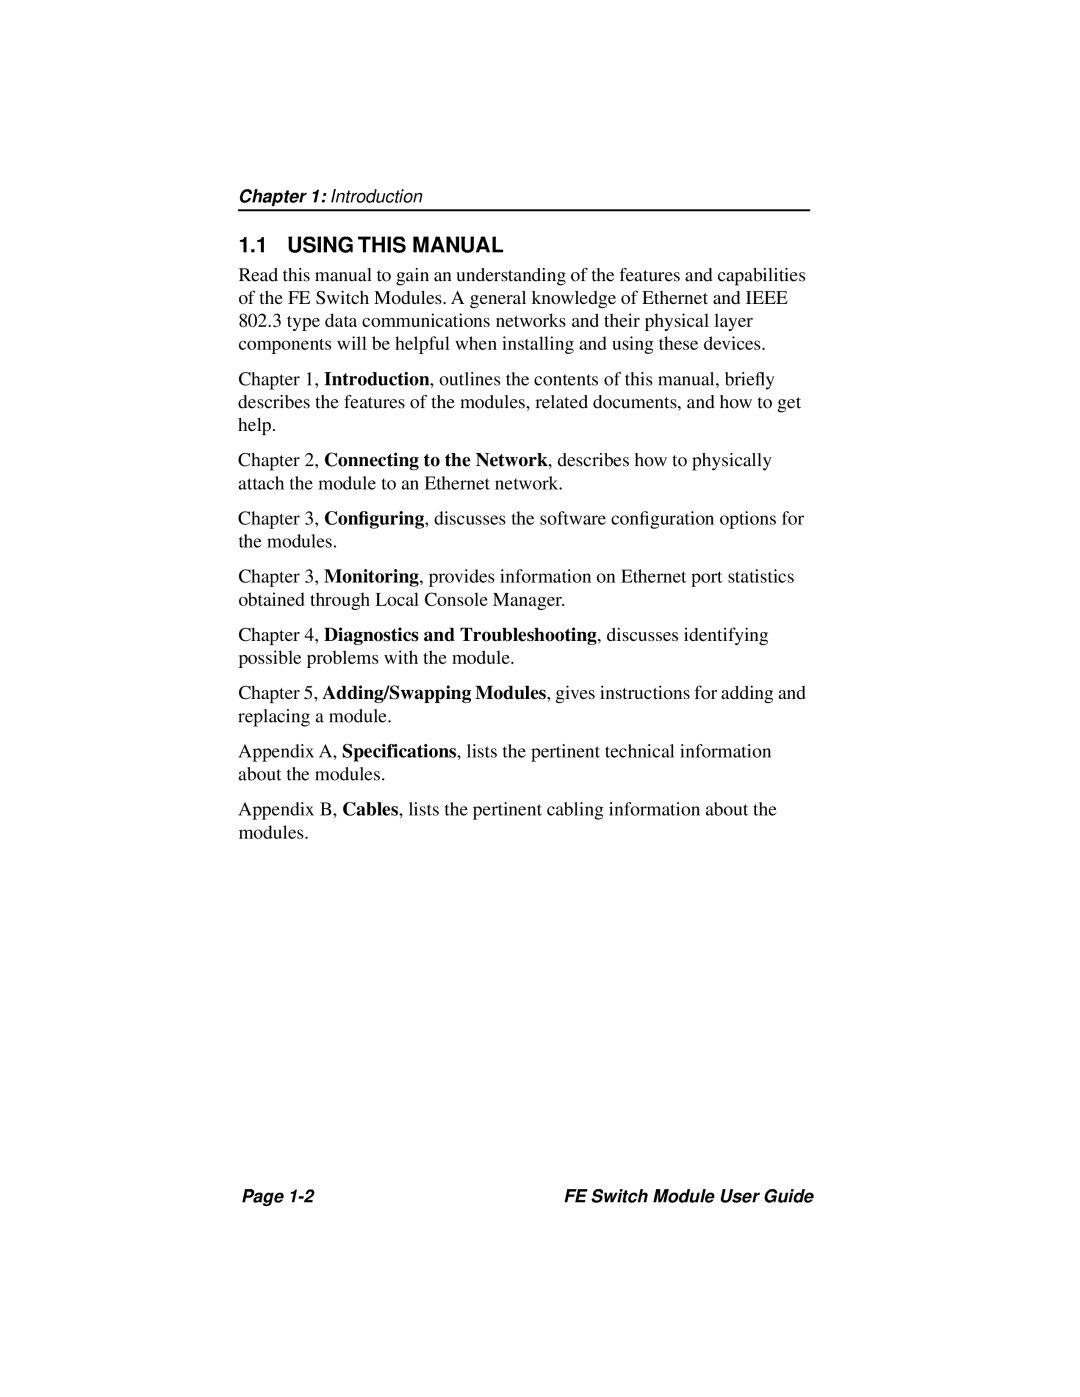 Cabletron Systems 3H02-04, 3H08-04 manual Using This Manual, Introduction 